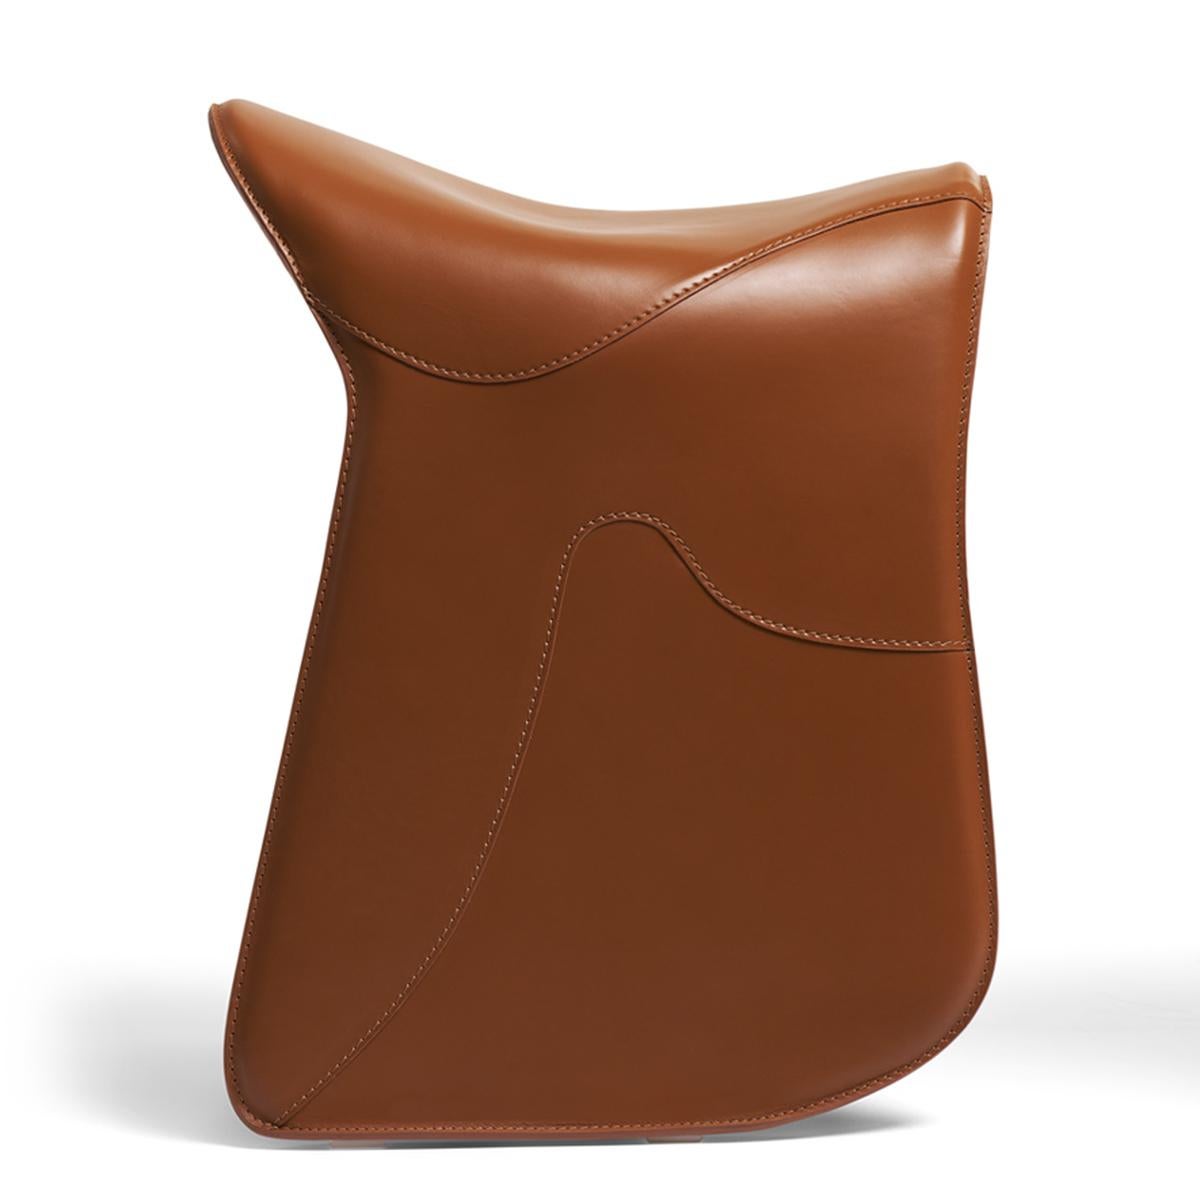 Stool Cavallero brown with structure in
steel and upholstered and covered with
handstitched genuine full grain brown leather.
Also available in black leather.